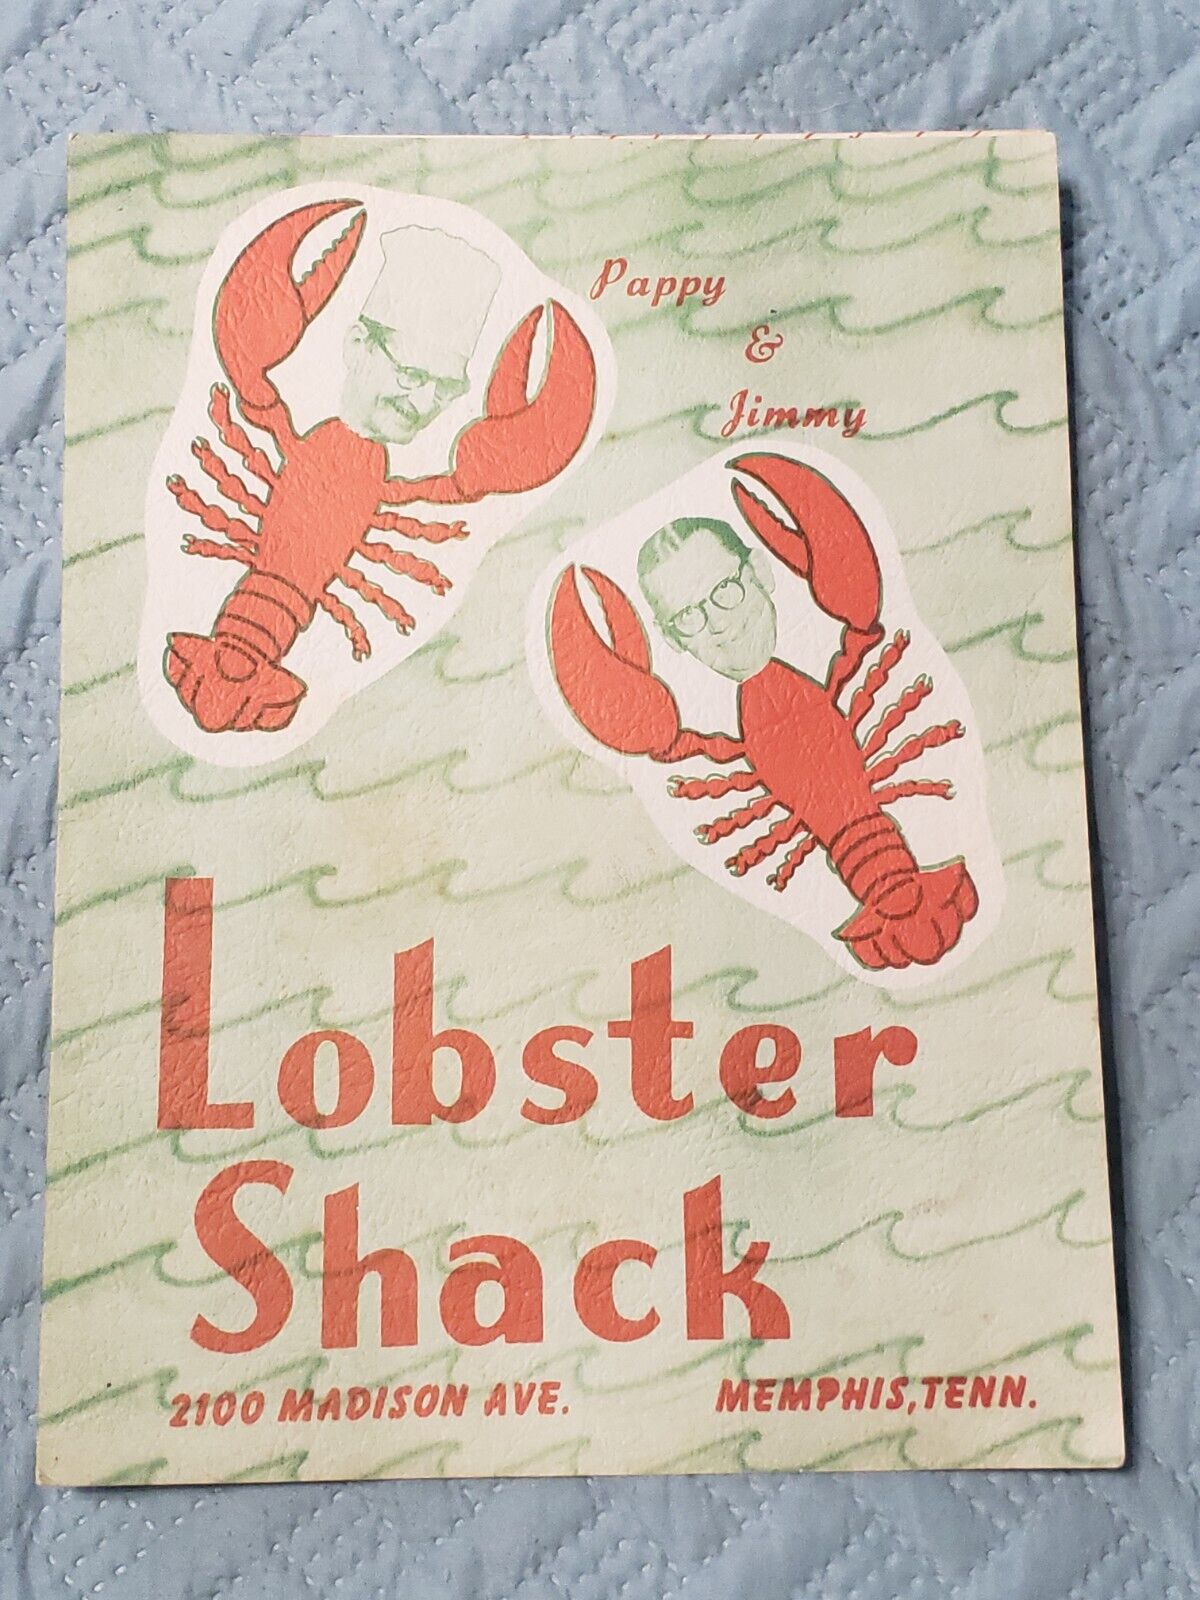 VINTAGE 1950\'s/1960\'s  PAPPY AND JIMMY LOBSTER SHACK  Restaurant Menu MEMPHIS TN